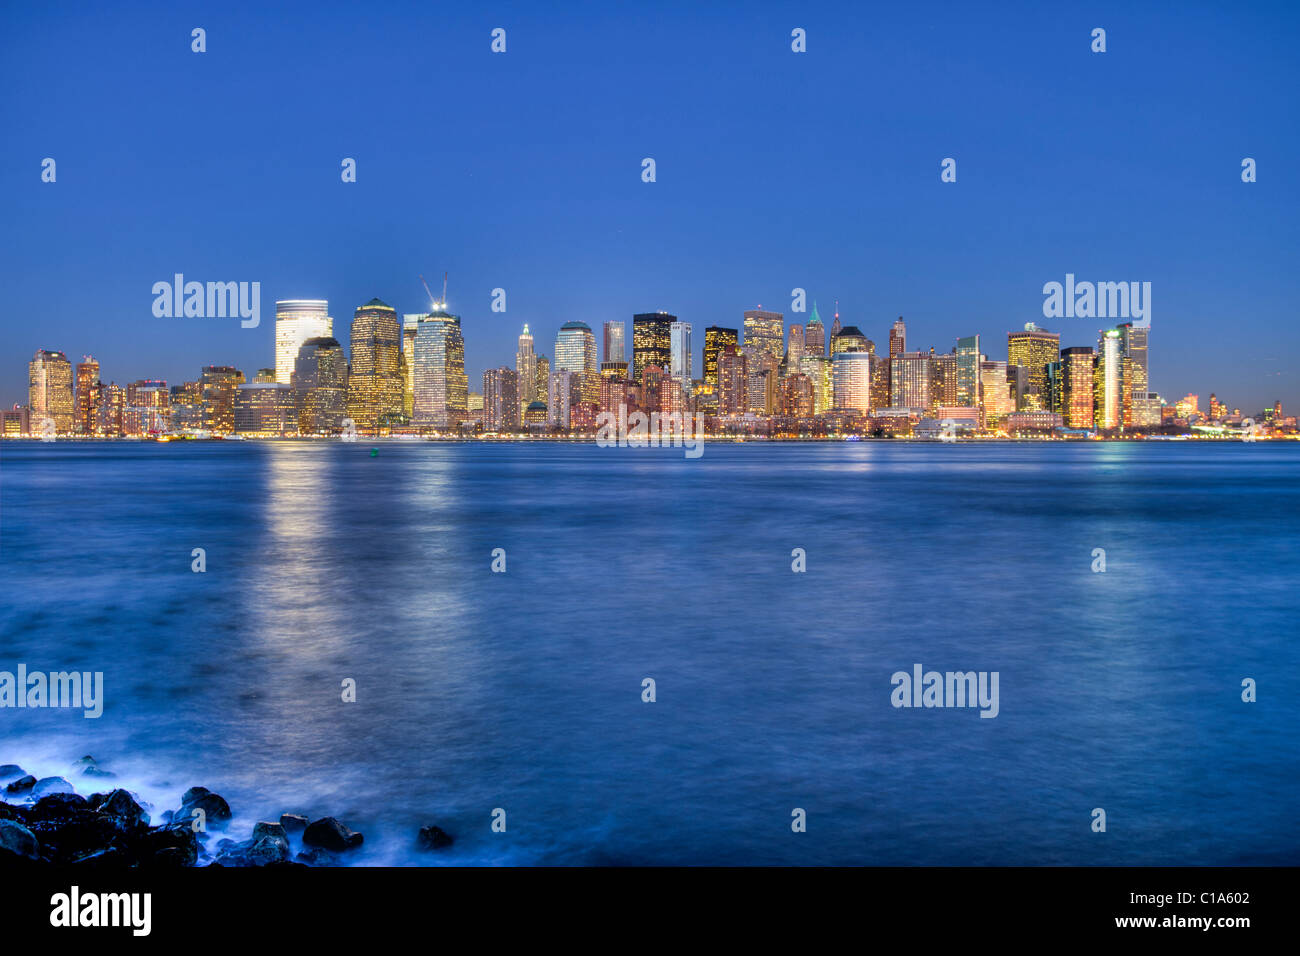 Skyline of lower Manhattan across the Hudson River at twilight seen from Liberty State Park in New Jersey Stock Photo